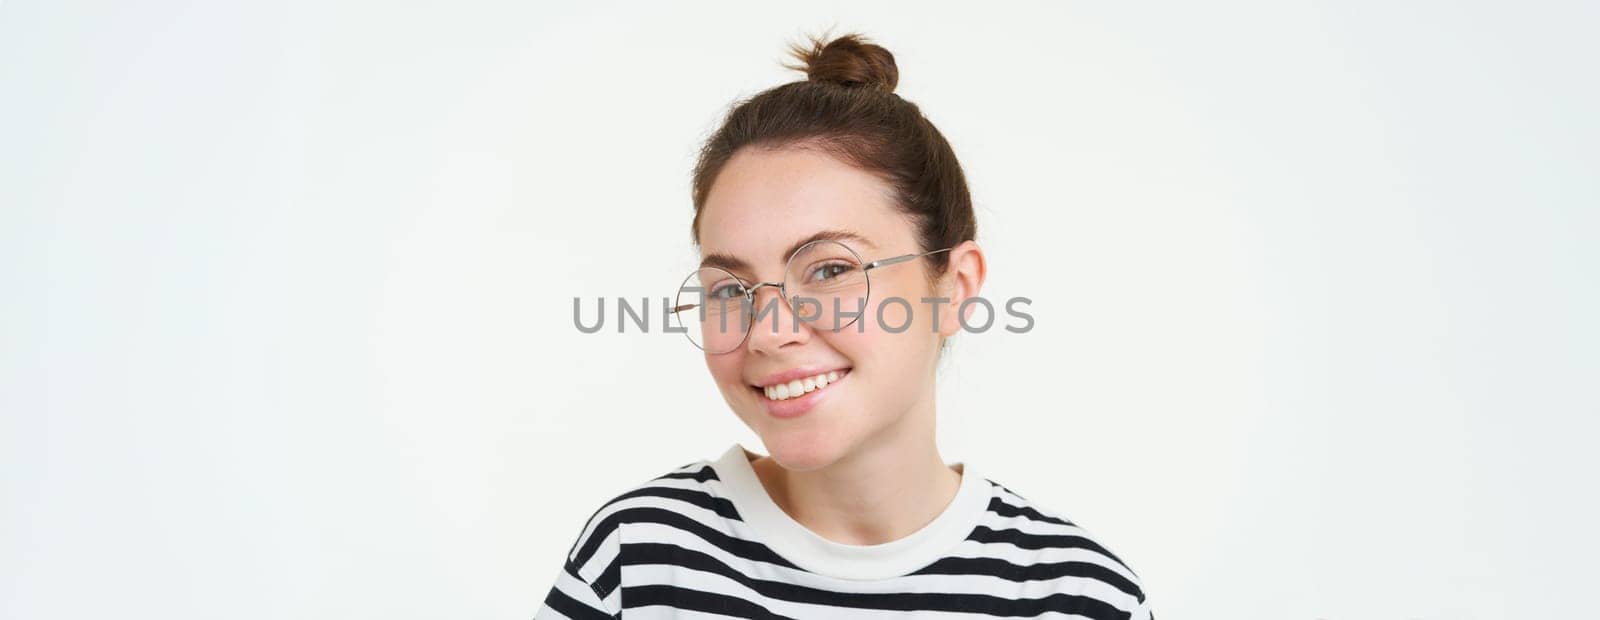 Image of young woman in glasses, using her mobile phone, standing with smartphone and smiling, standing over white background.